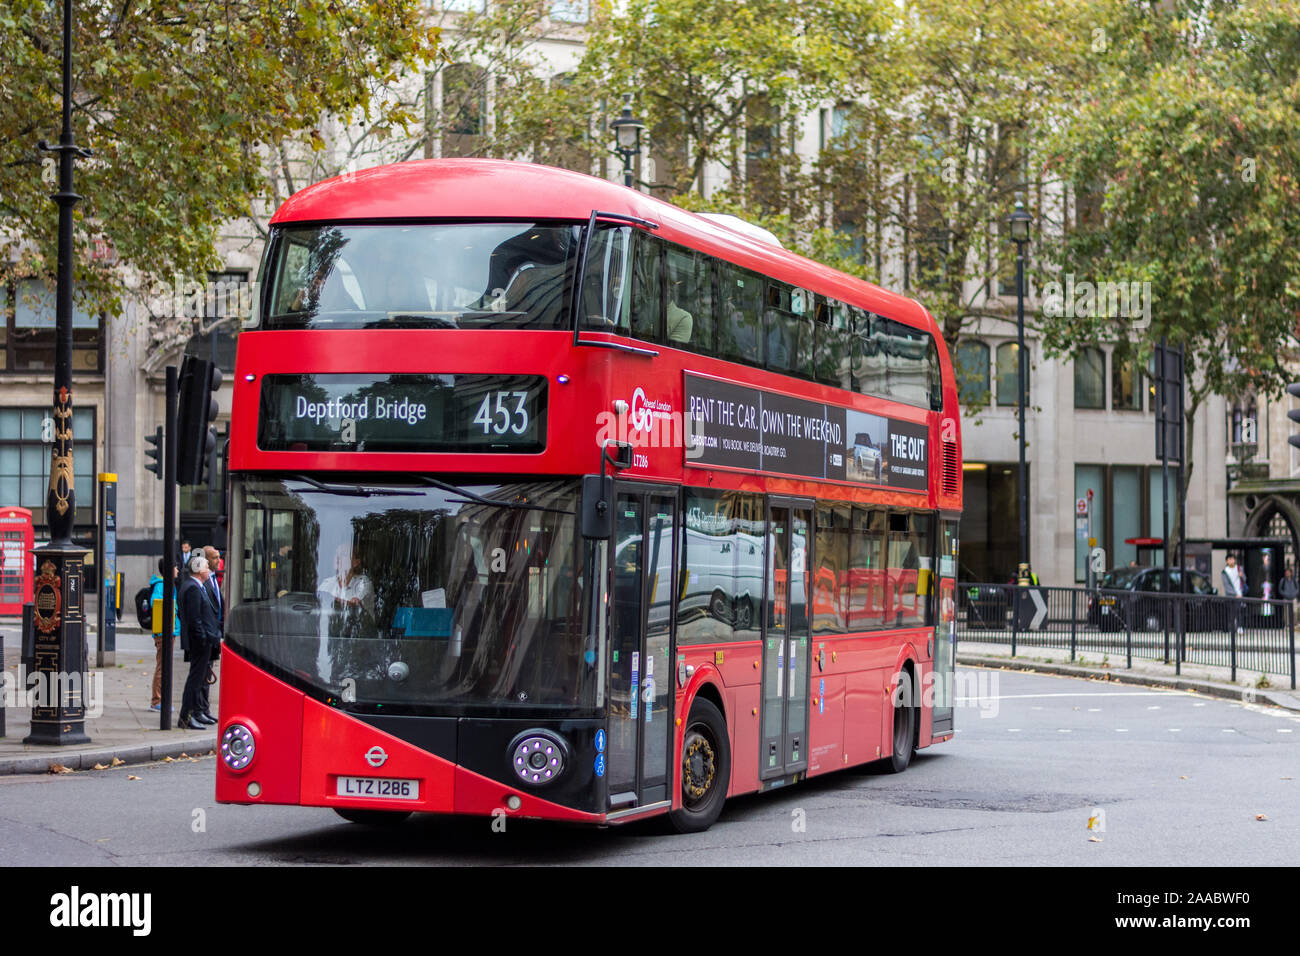 London, England –October 11, 2019:  Double deck routemaster bus, line 453 in central London Stock Photo